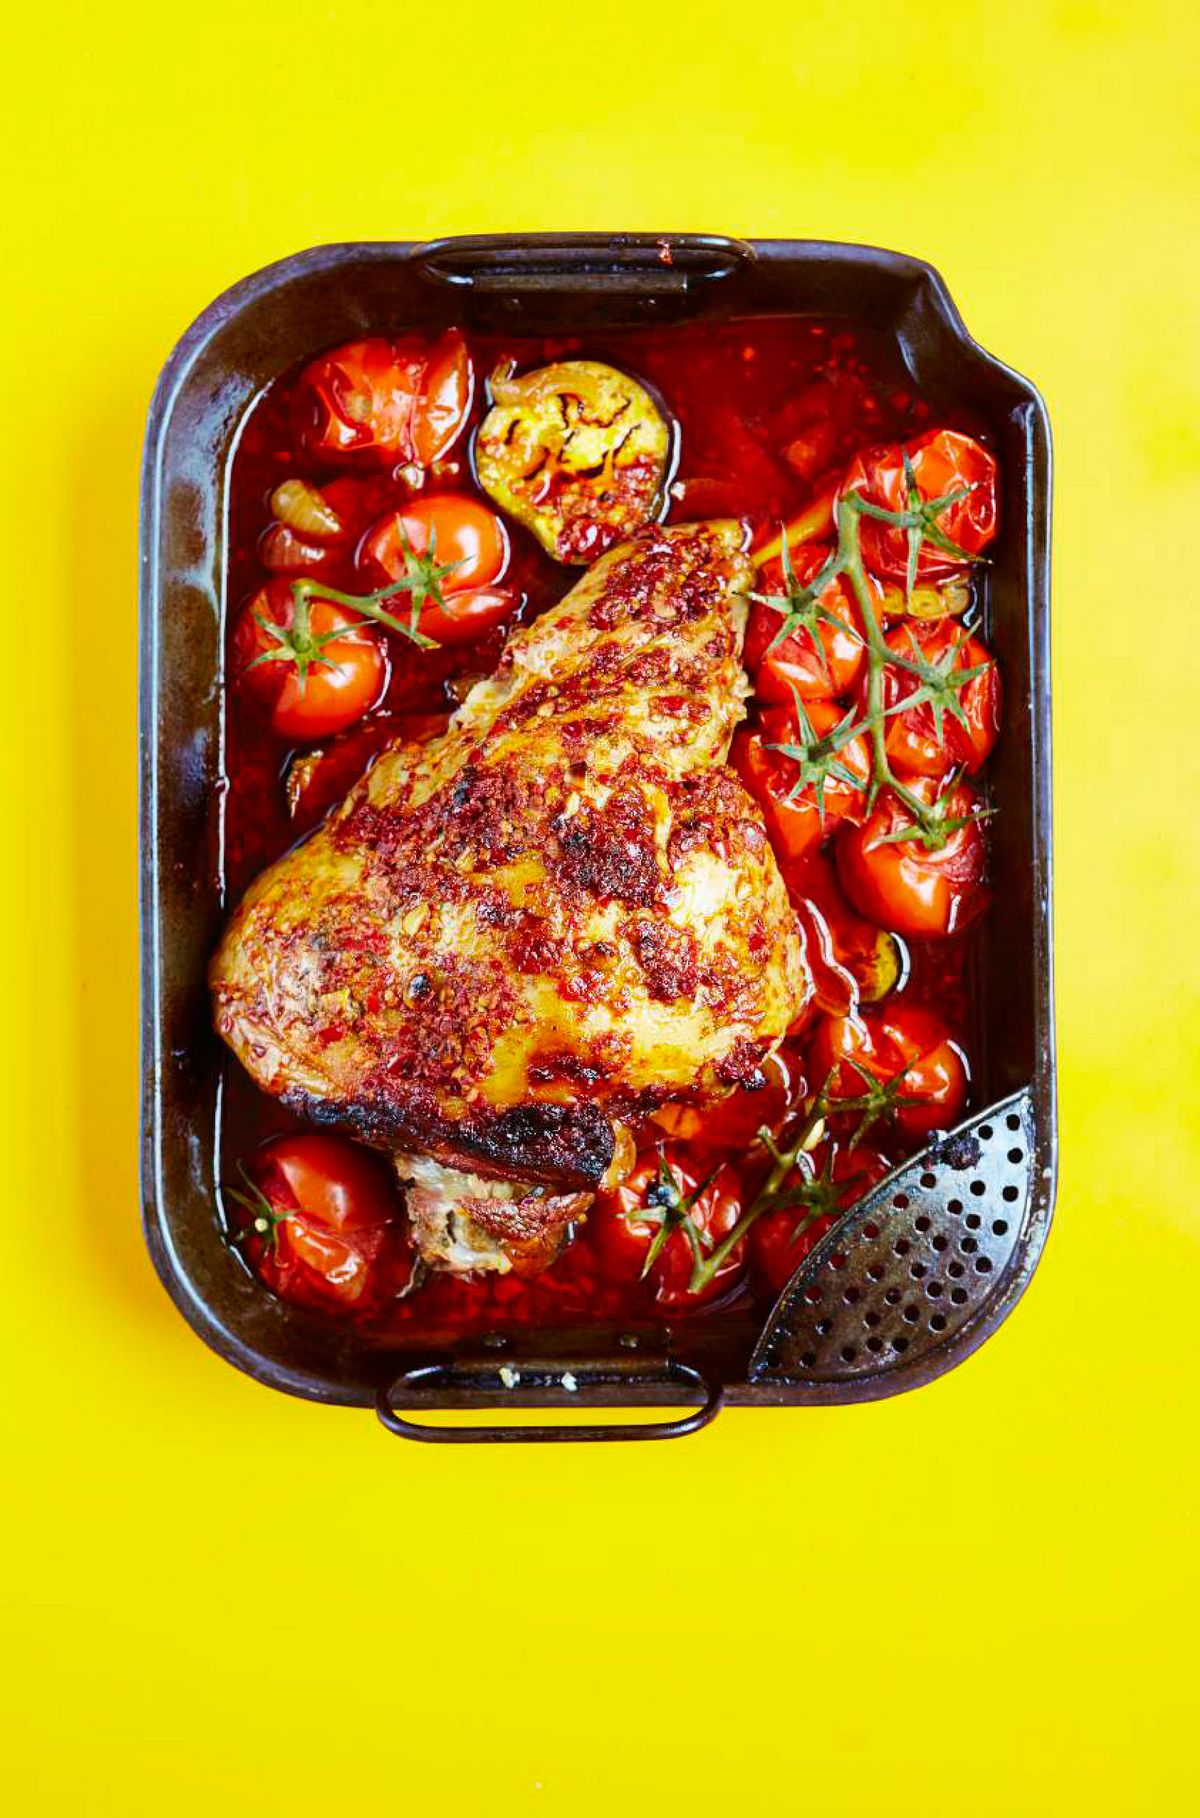 Slow-cooked Leg of Lamb with Harissa, Roasted Aubergines & Tomatoes